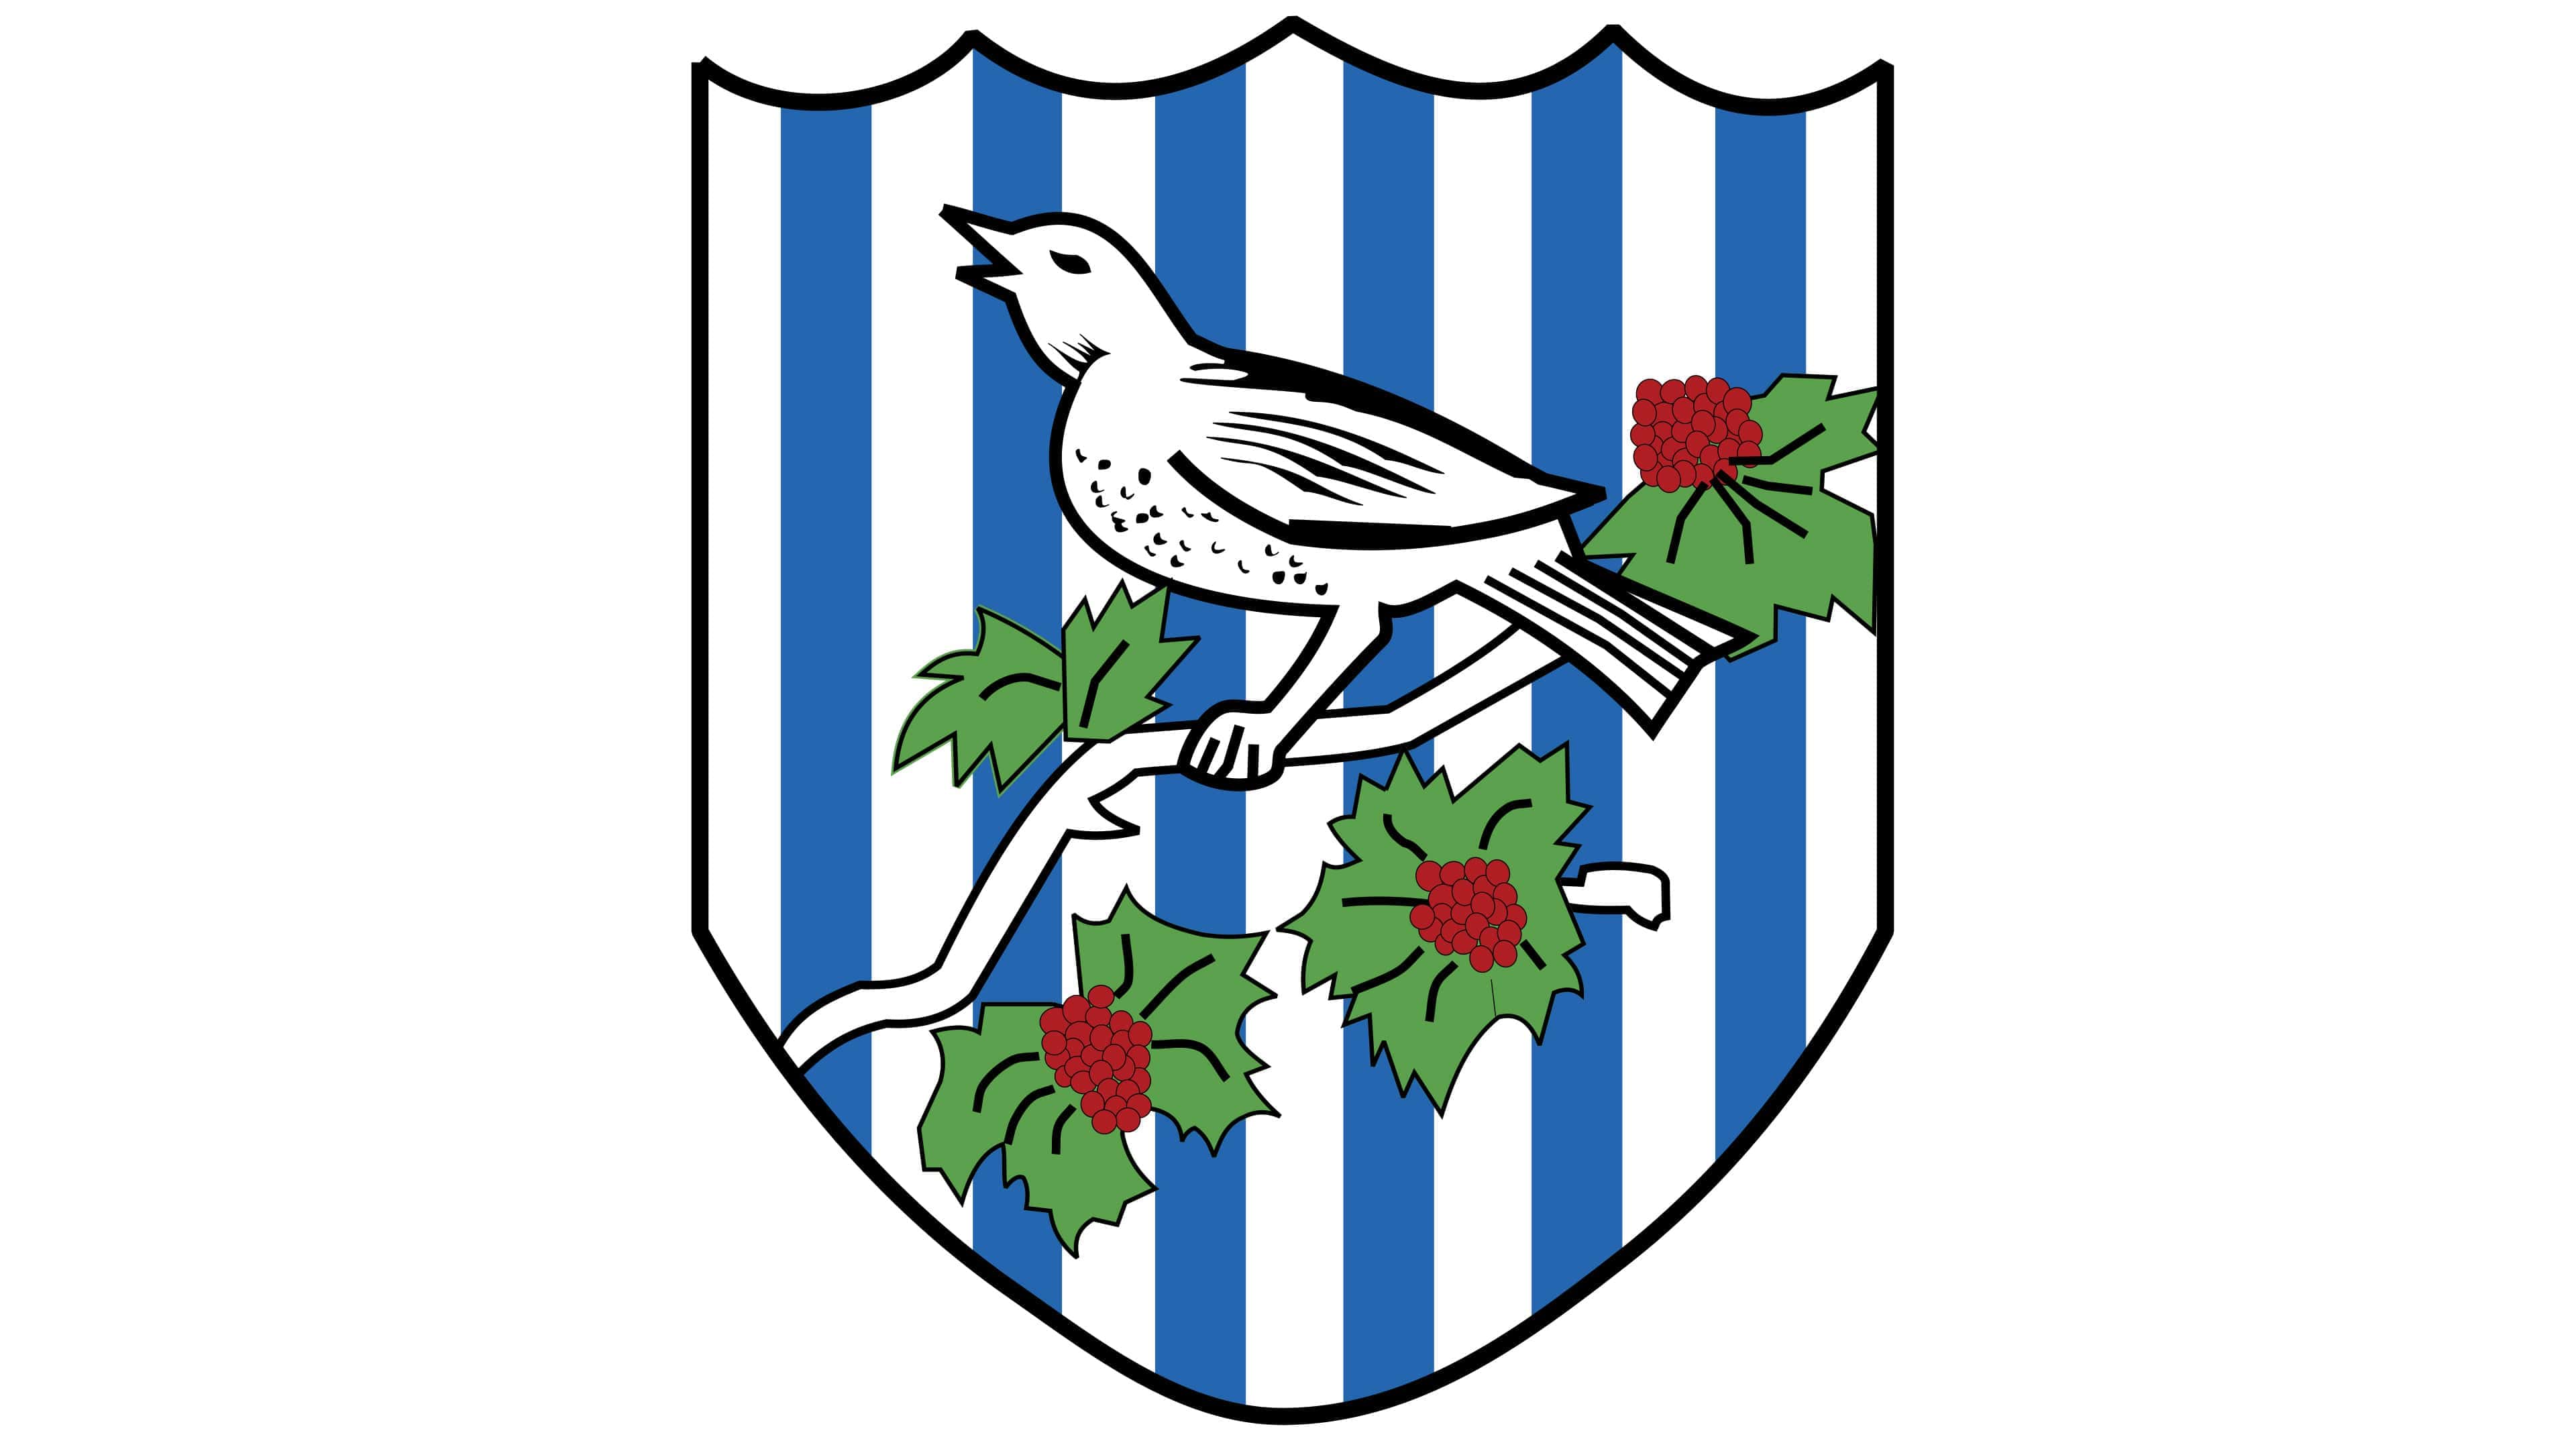 West Bromwich Albion Logo and symbol, meaning, history, PNG, brand